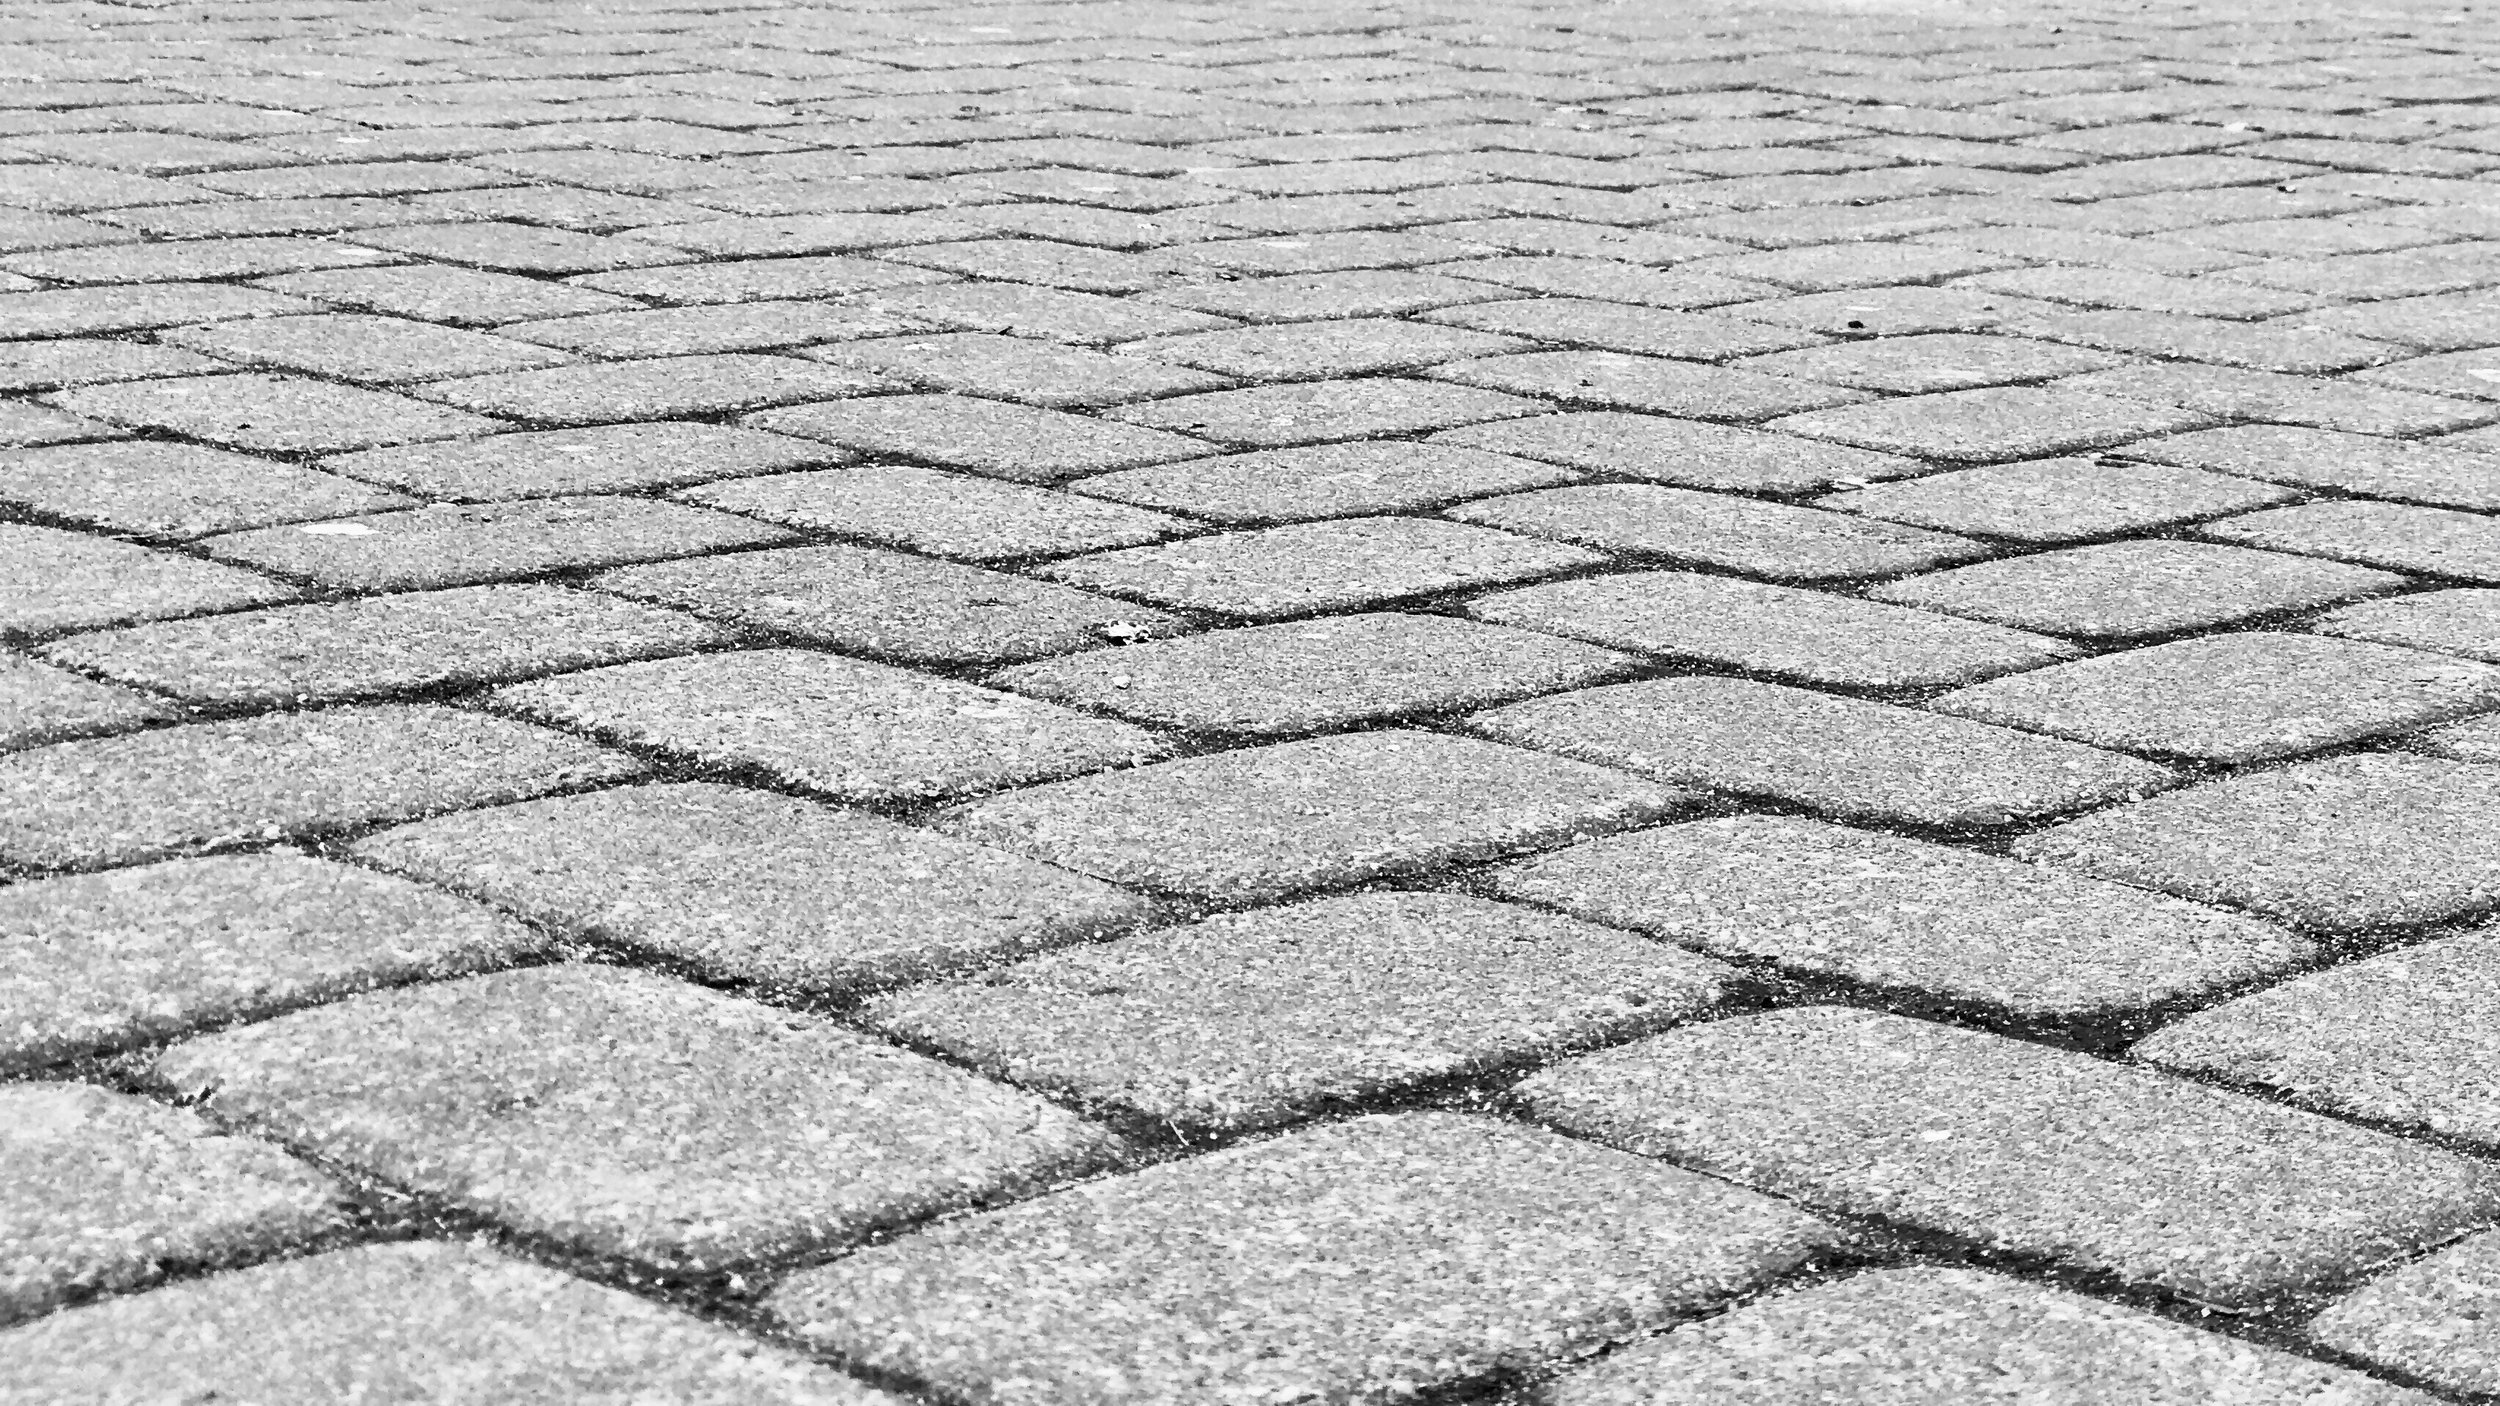 Sidewalk and street pavers are cooler and more porous than conventional dark, impervious pavements, reducing stormwater runoff and associated pollution and flooding risk.